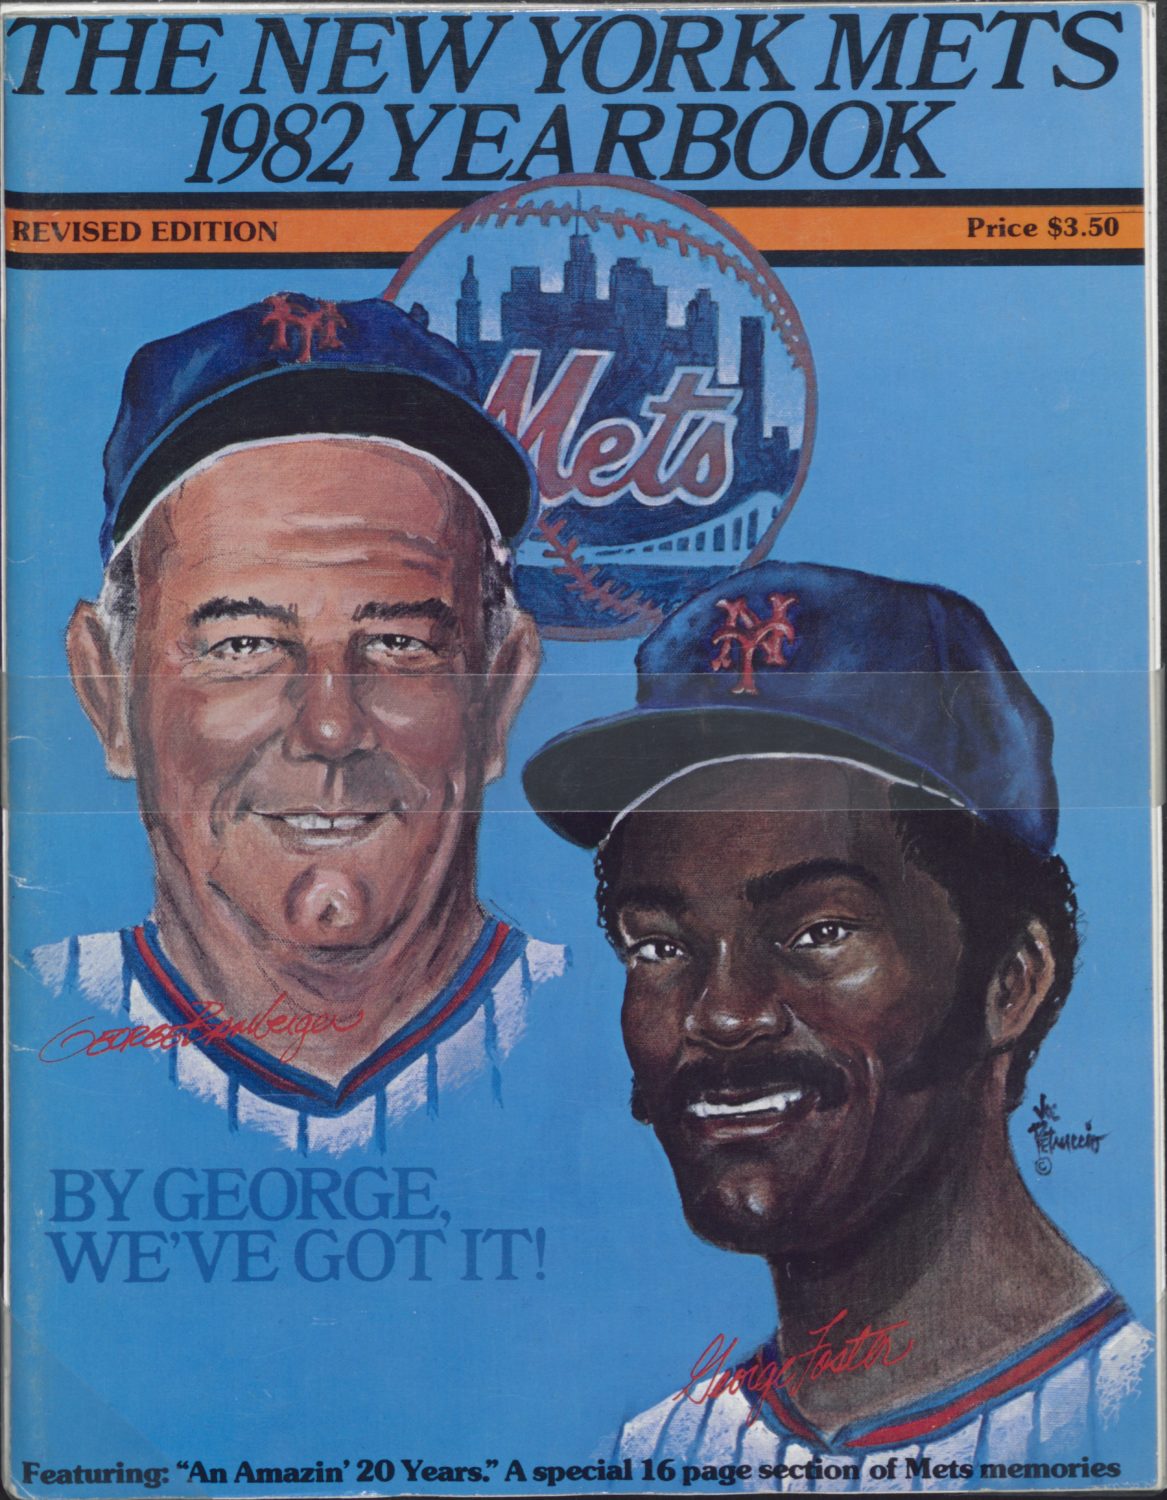 1982 Mets Yearbook with George Bamberger and George Foster on Cover